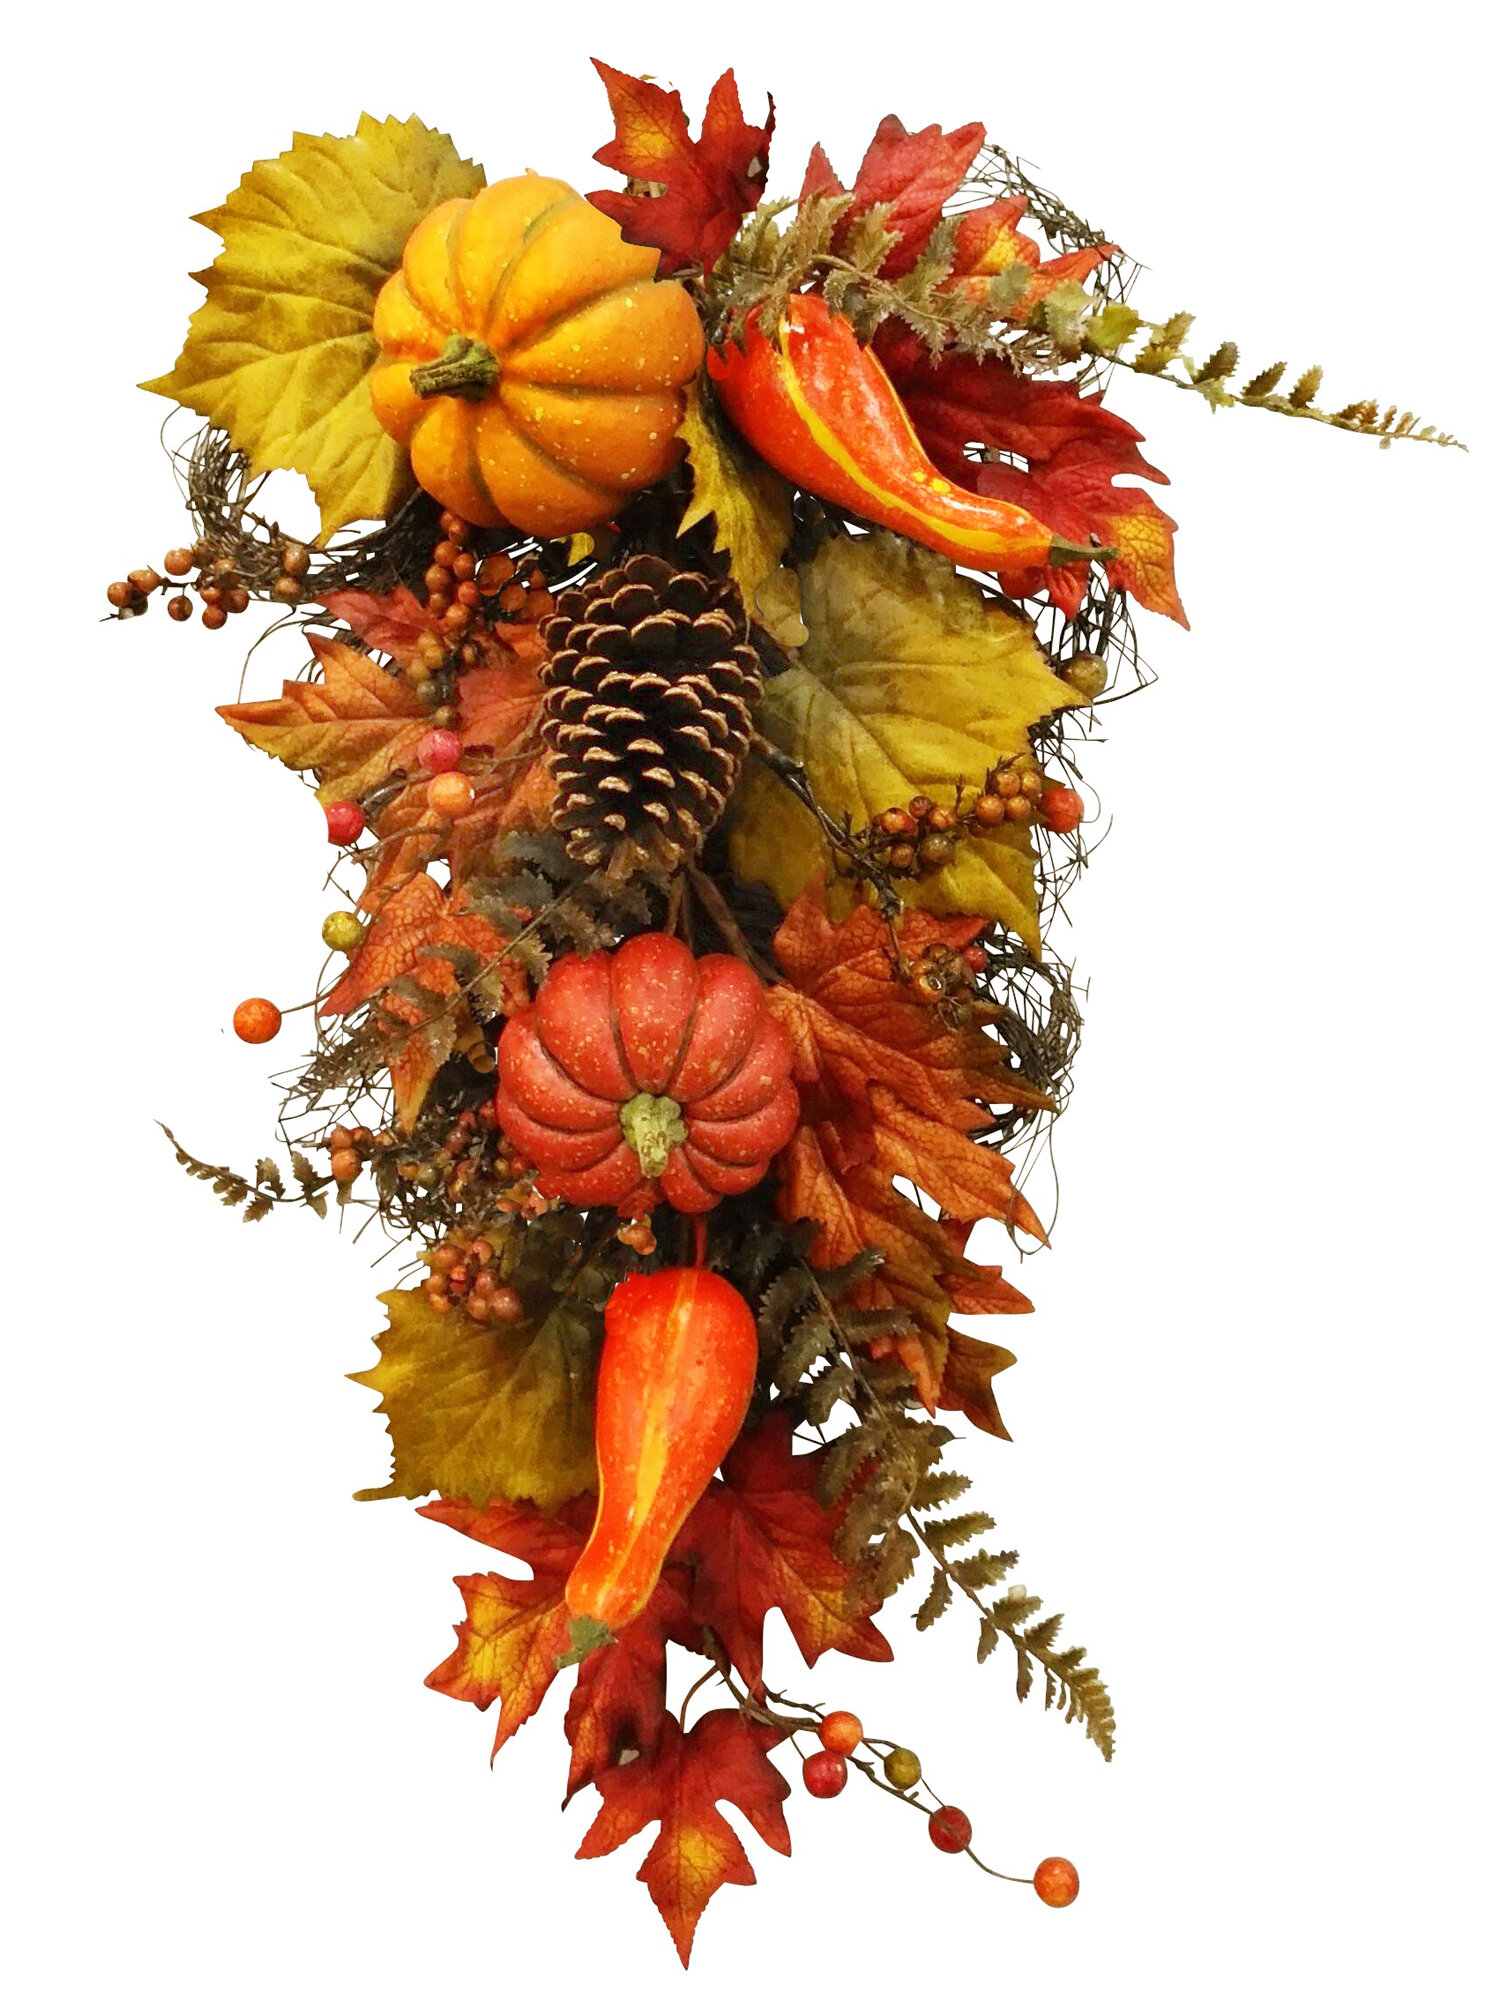 Artificial Fall Wheat Ears Swag,Autumn Harvest Decorative Swag,Hanging Teardrop Floral Swag,Farmhouse Swag Garland for Front Door,Artificial Flowers Leaves Swag Wreaths,Thanksgiving Xmas Wall Decor